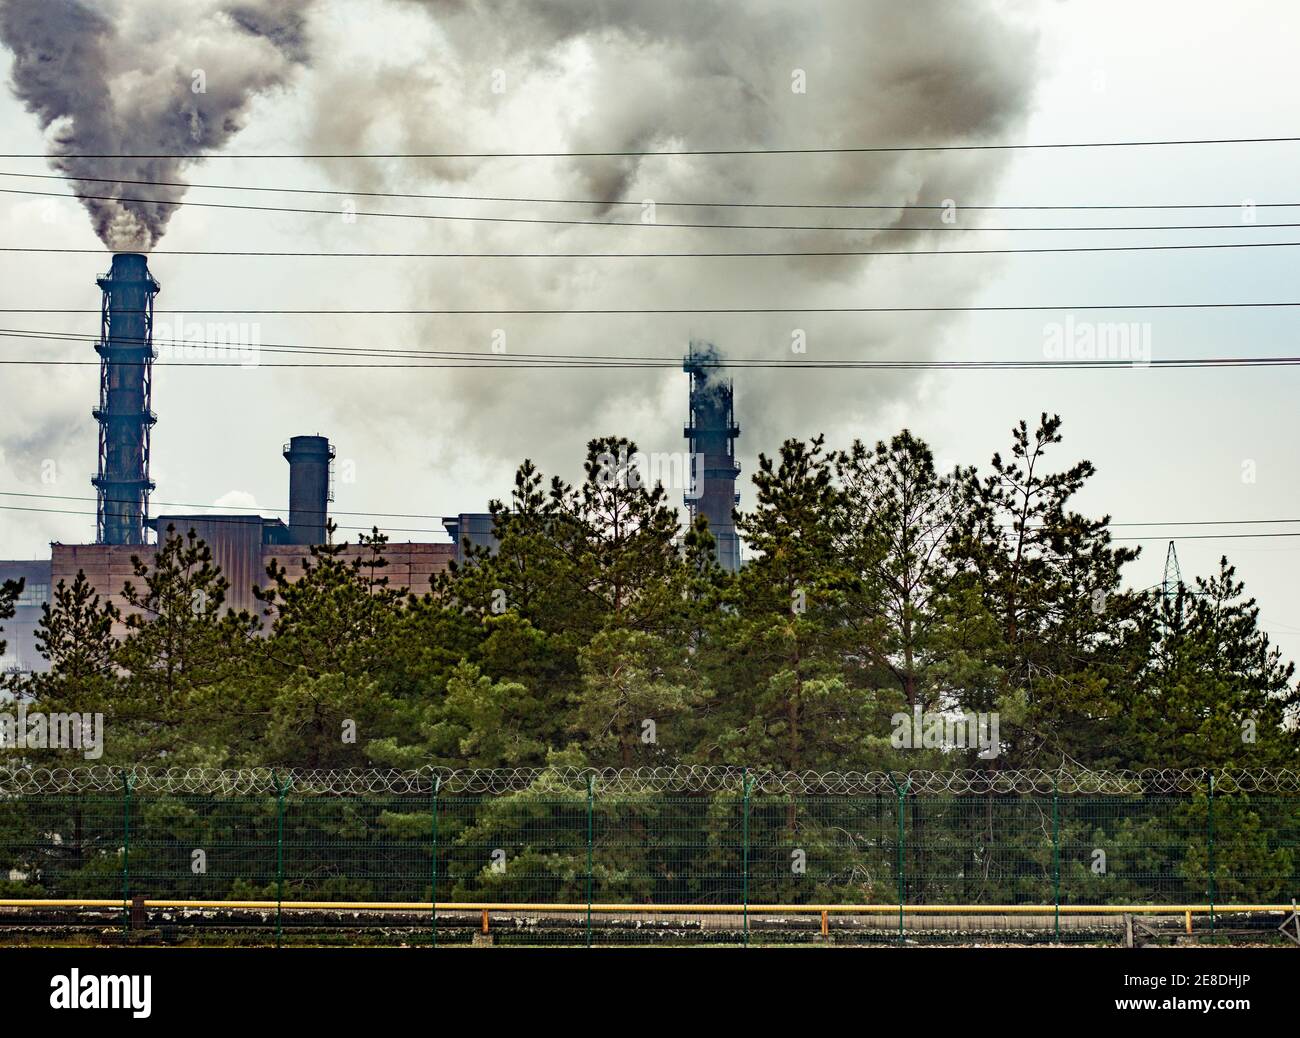 behind the trees, the chimneys of a large industrial enterprise smoke. Stock Photo